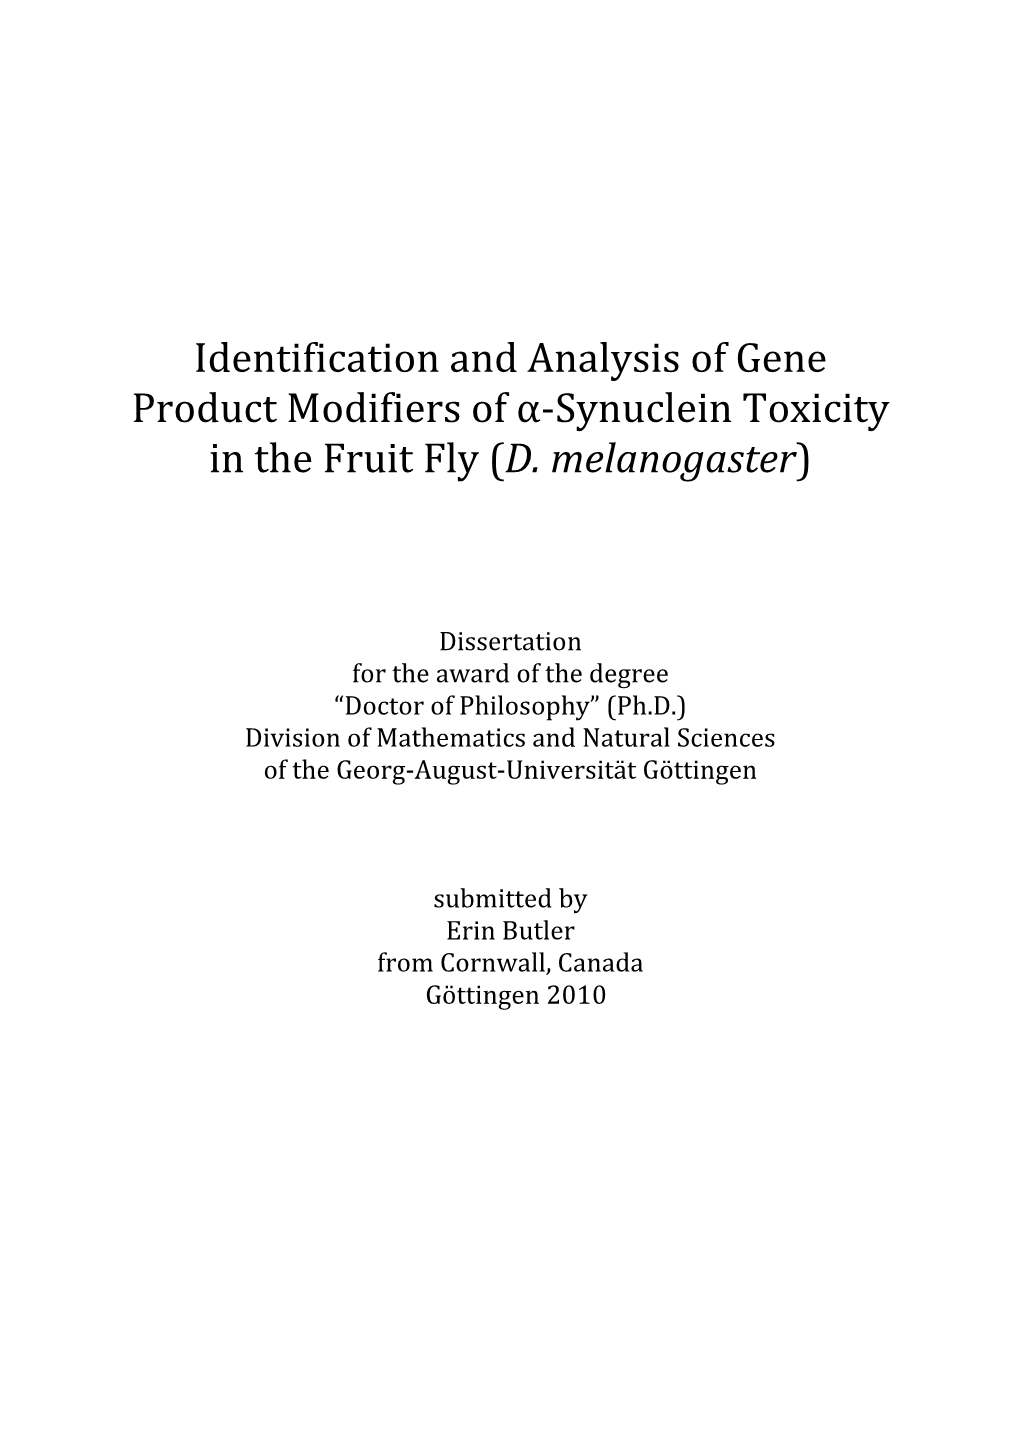 Identification and Analysis of Gene Product Modifiers of Α-Synuclein Toxicity in the Fruit Fly (D